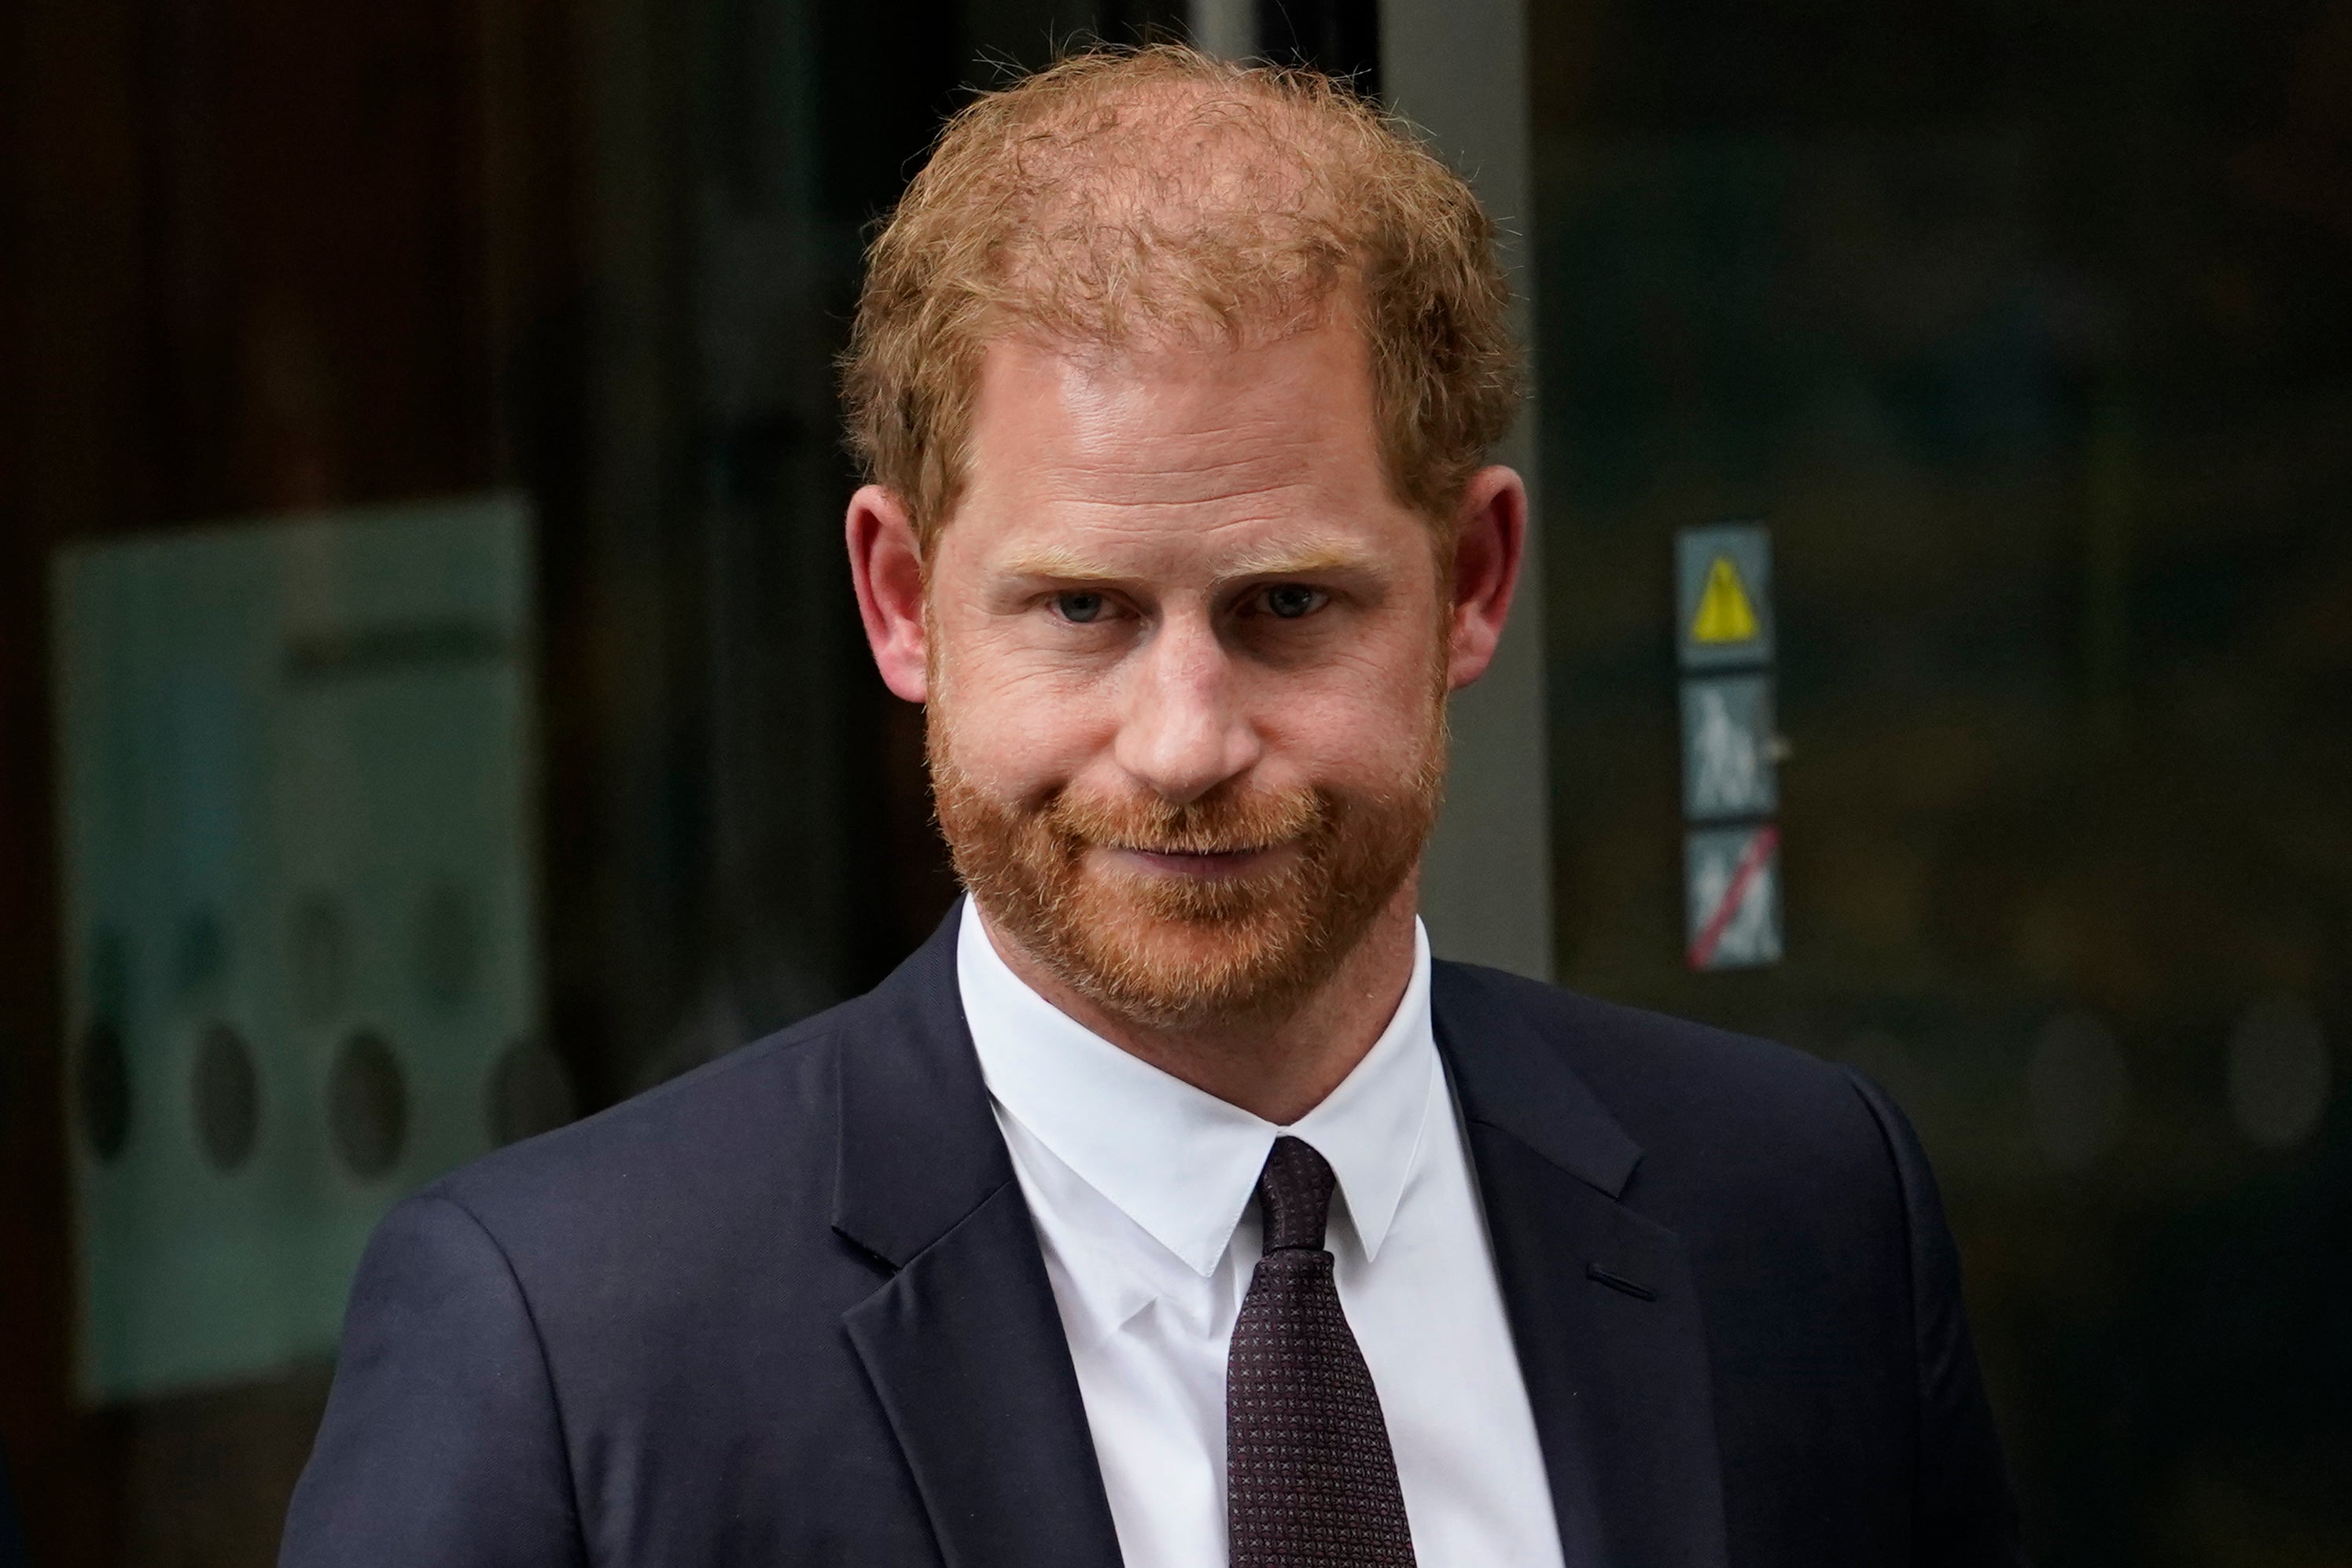 Prince Harry attended the trial in June to give evidence